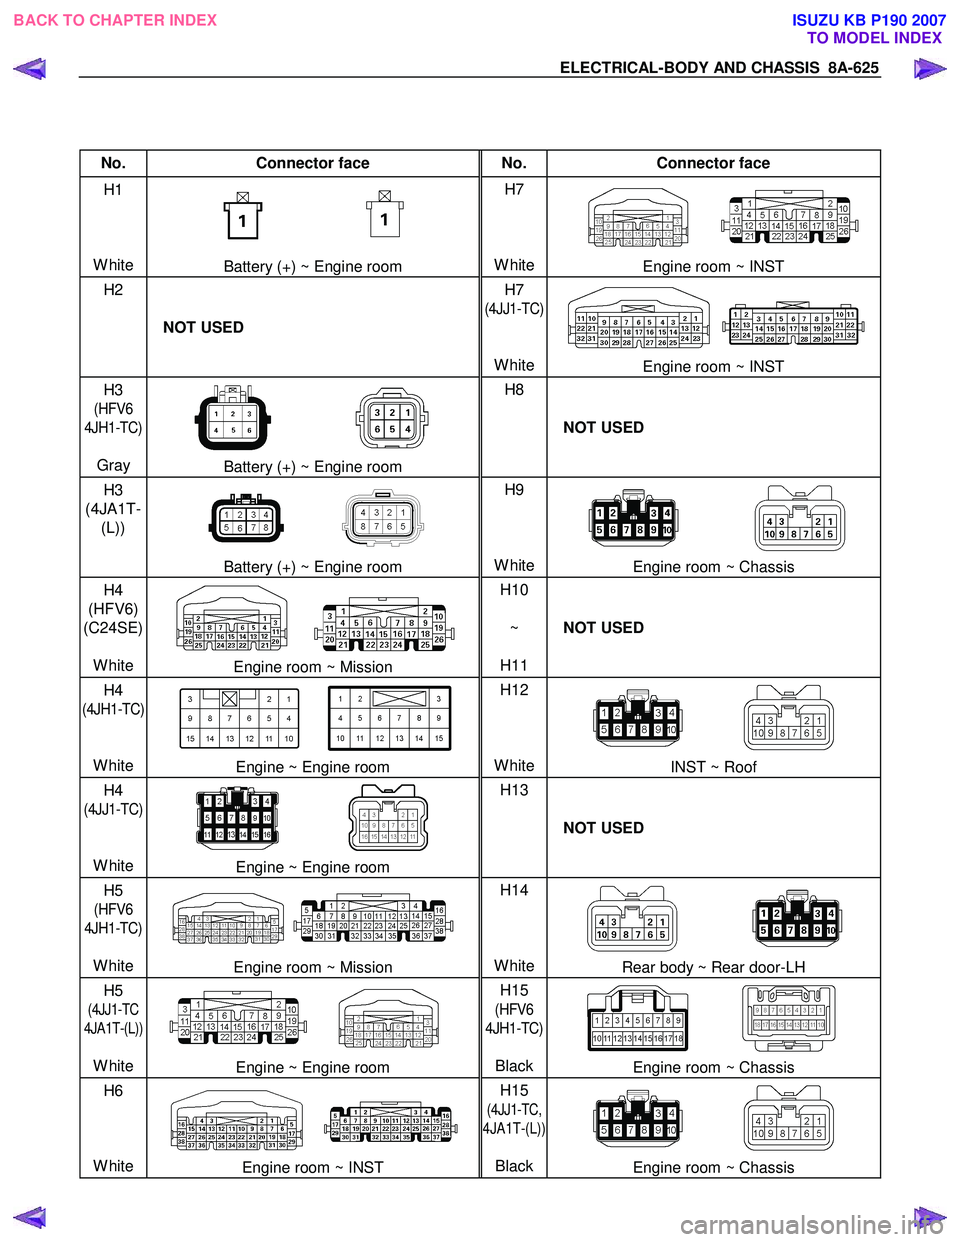 ISUZU KB P190 2007  Workshop Repair Manual ELECTRICAL-BODY AND CHASSIS  8A-625 
 
 
No. Connector face  No. Connector face 
H1 
  
 
 
White 
Battery (+) ~ Engine room  H7 
 
 
 
WhiteEngine room ~ INST 
H2   
 
 
  NOT USED  H7 
(4JJ1-TC)
 
 